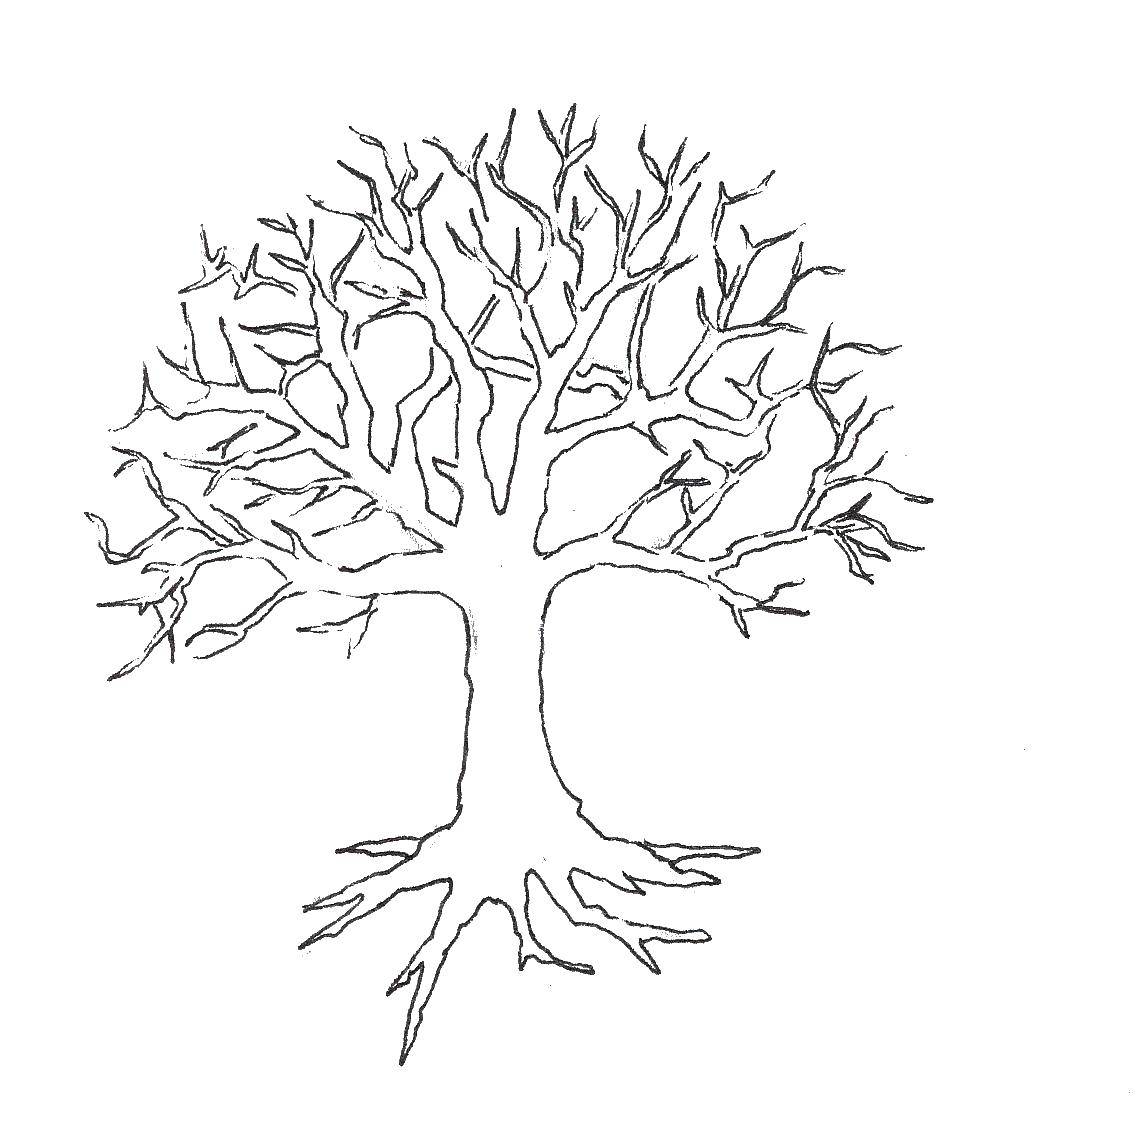 Coloring Tree without leaves. Category The contours of the leaves of the trees. Tags:  tree.